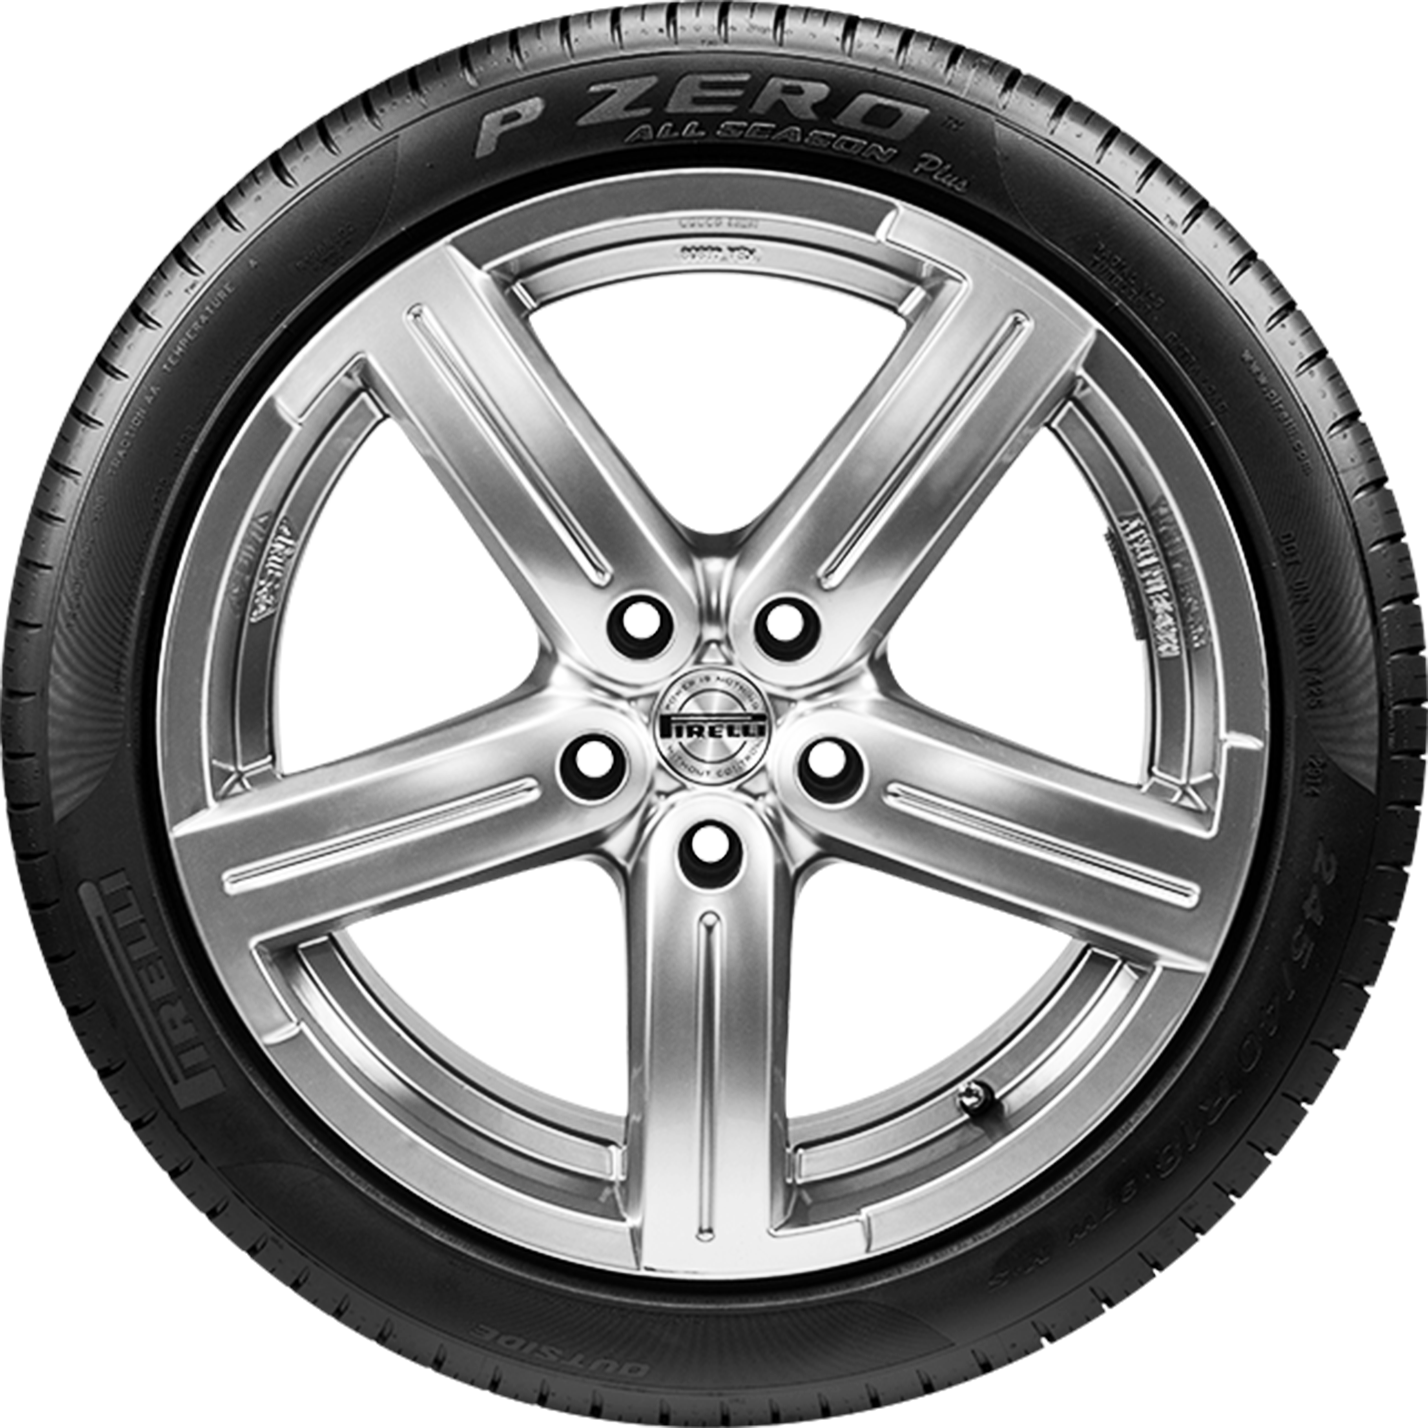 All season tires | Catalog of car tires for summer and winter | Pirelli